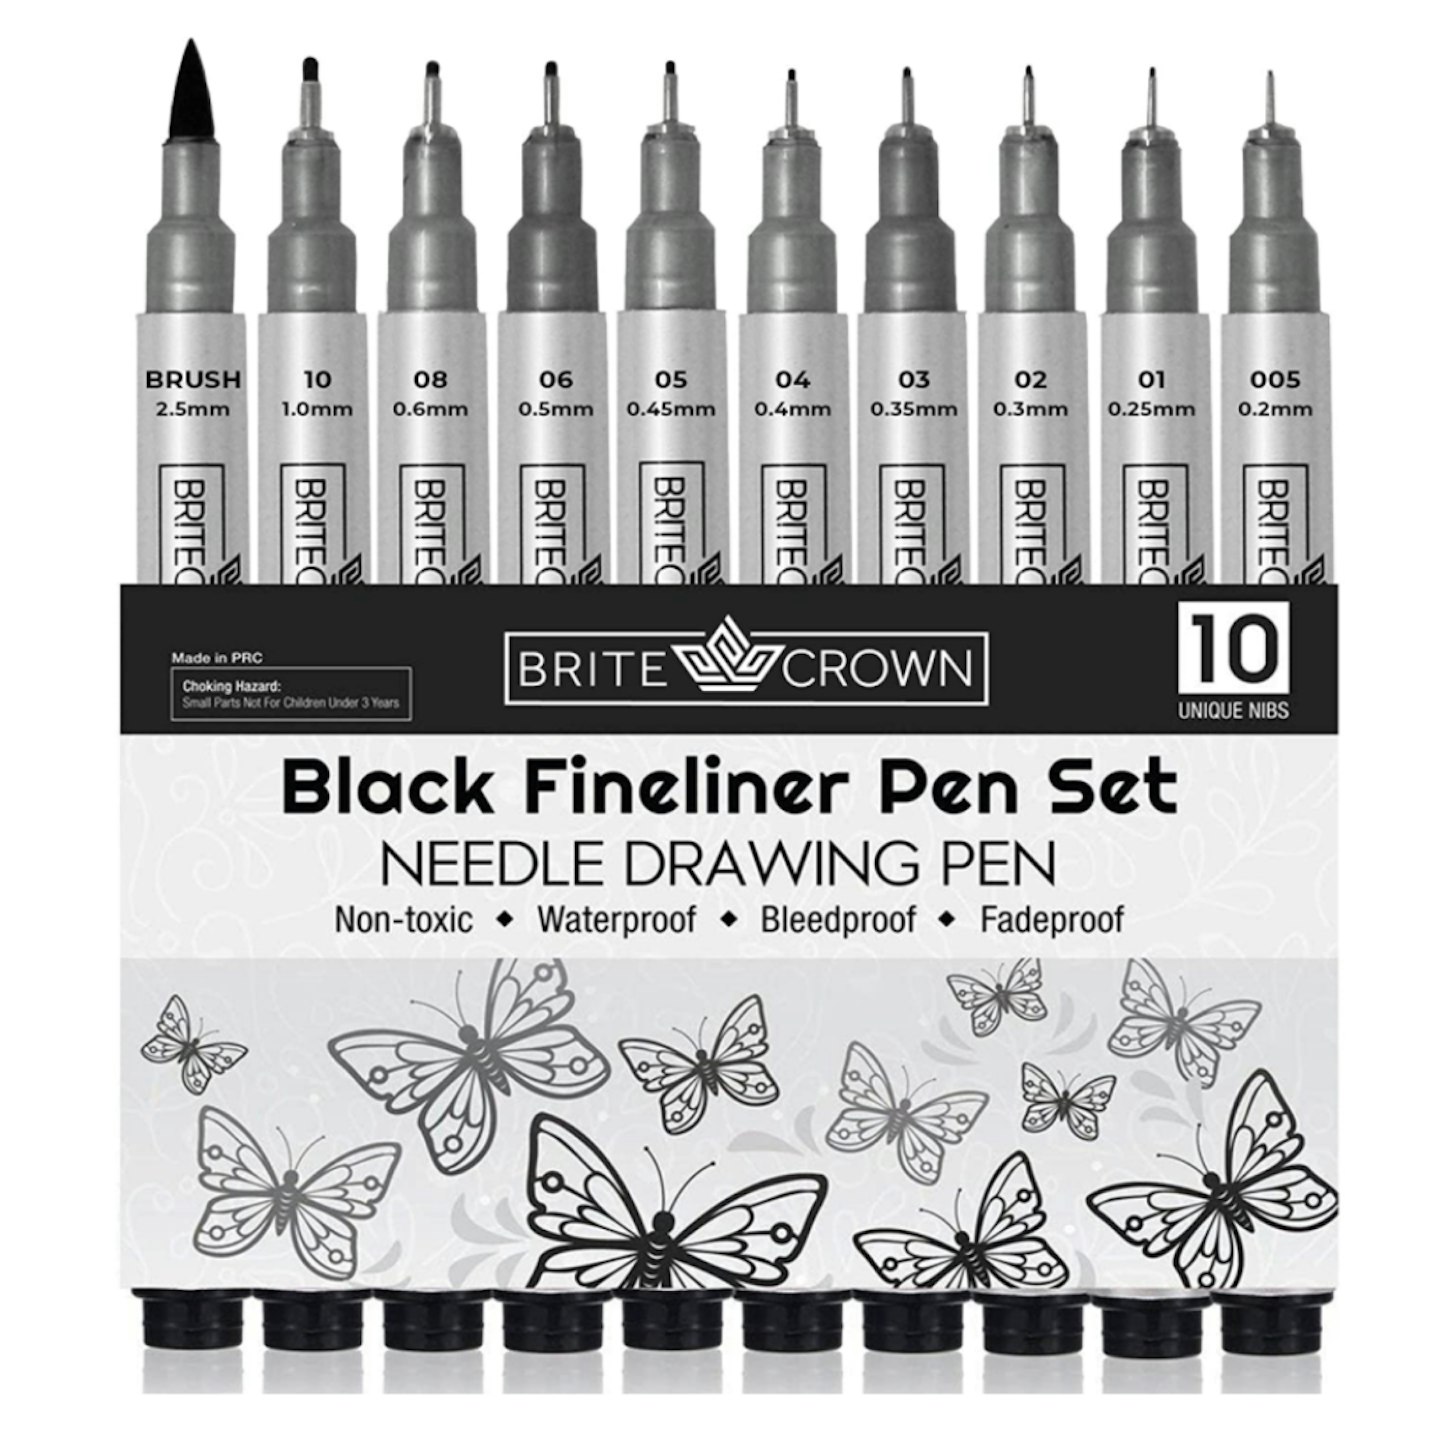 https://images.bauerhosting.com/legacy/media/620a/77f9/accb/d901/2ce1/4368/Premium-Drawing-Pens-Set-of-10-Various-Size-Tip-Fineliner-Pens-0.2mm-to-1.0mm-Width-Tips-Plus-2.5mm-Calligraphy-Brush-Tip-Pen.png?auto=format&w=1440&q=80